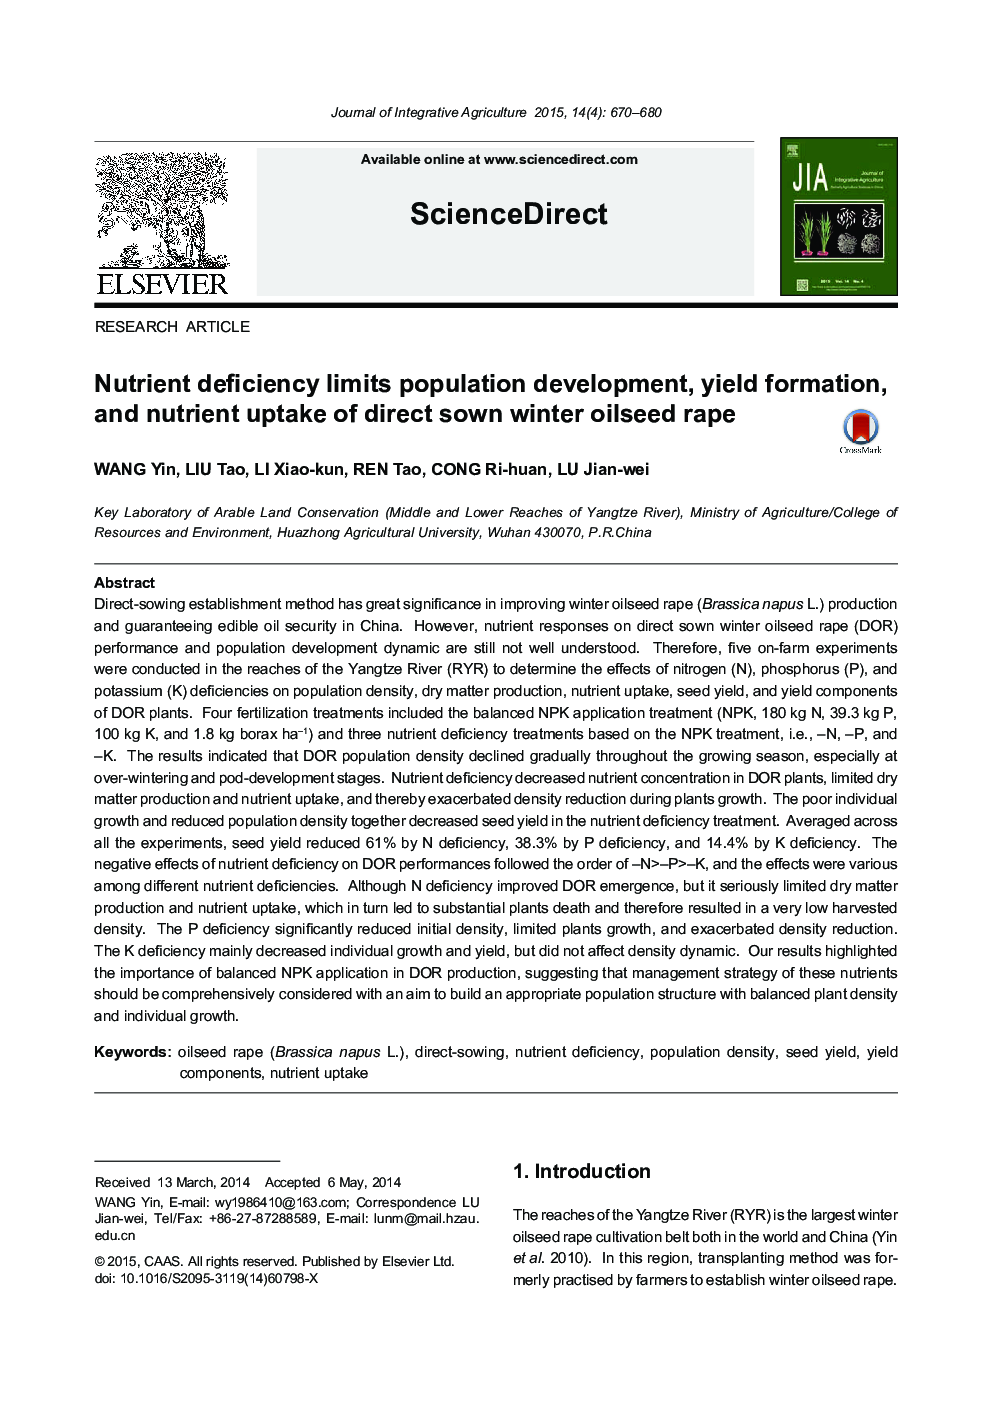 Nutrient deficiency limits population development, yield formation, and nutrient uptake of direct sown winter oilseed rape